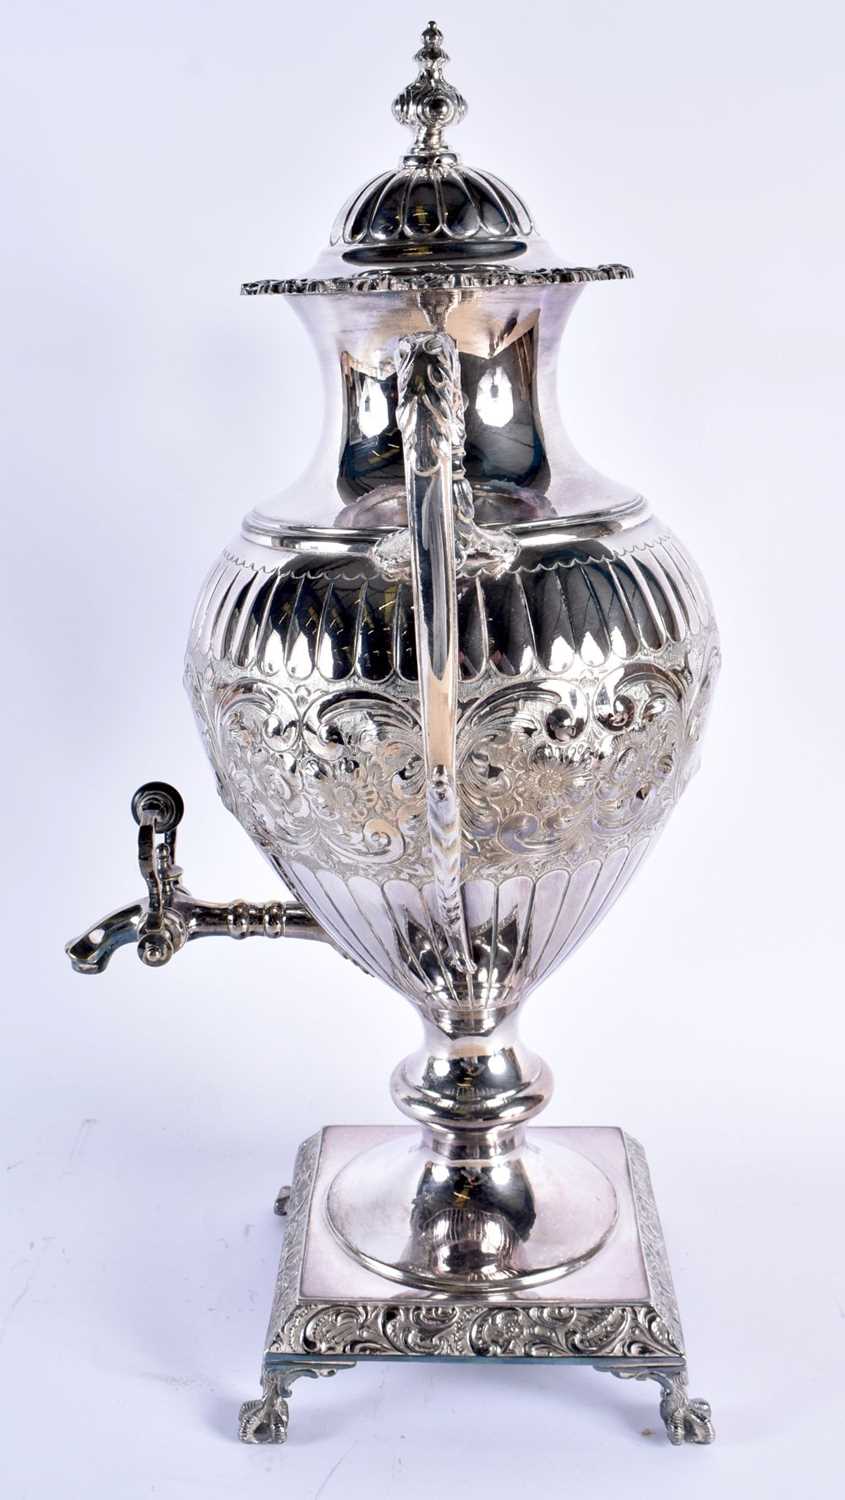 A LARGE VICTORIAN SILVER PLATED SAMOVAR. 3915 grams. 50 cm x 27 cm. - Image 2 of 6